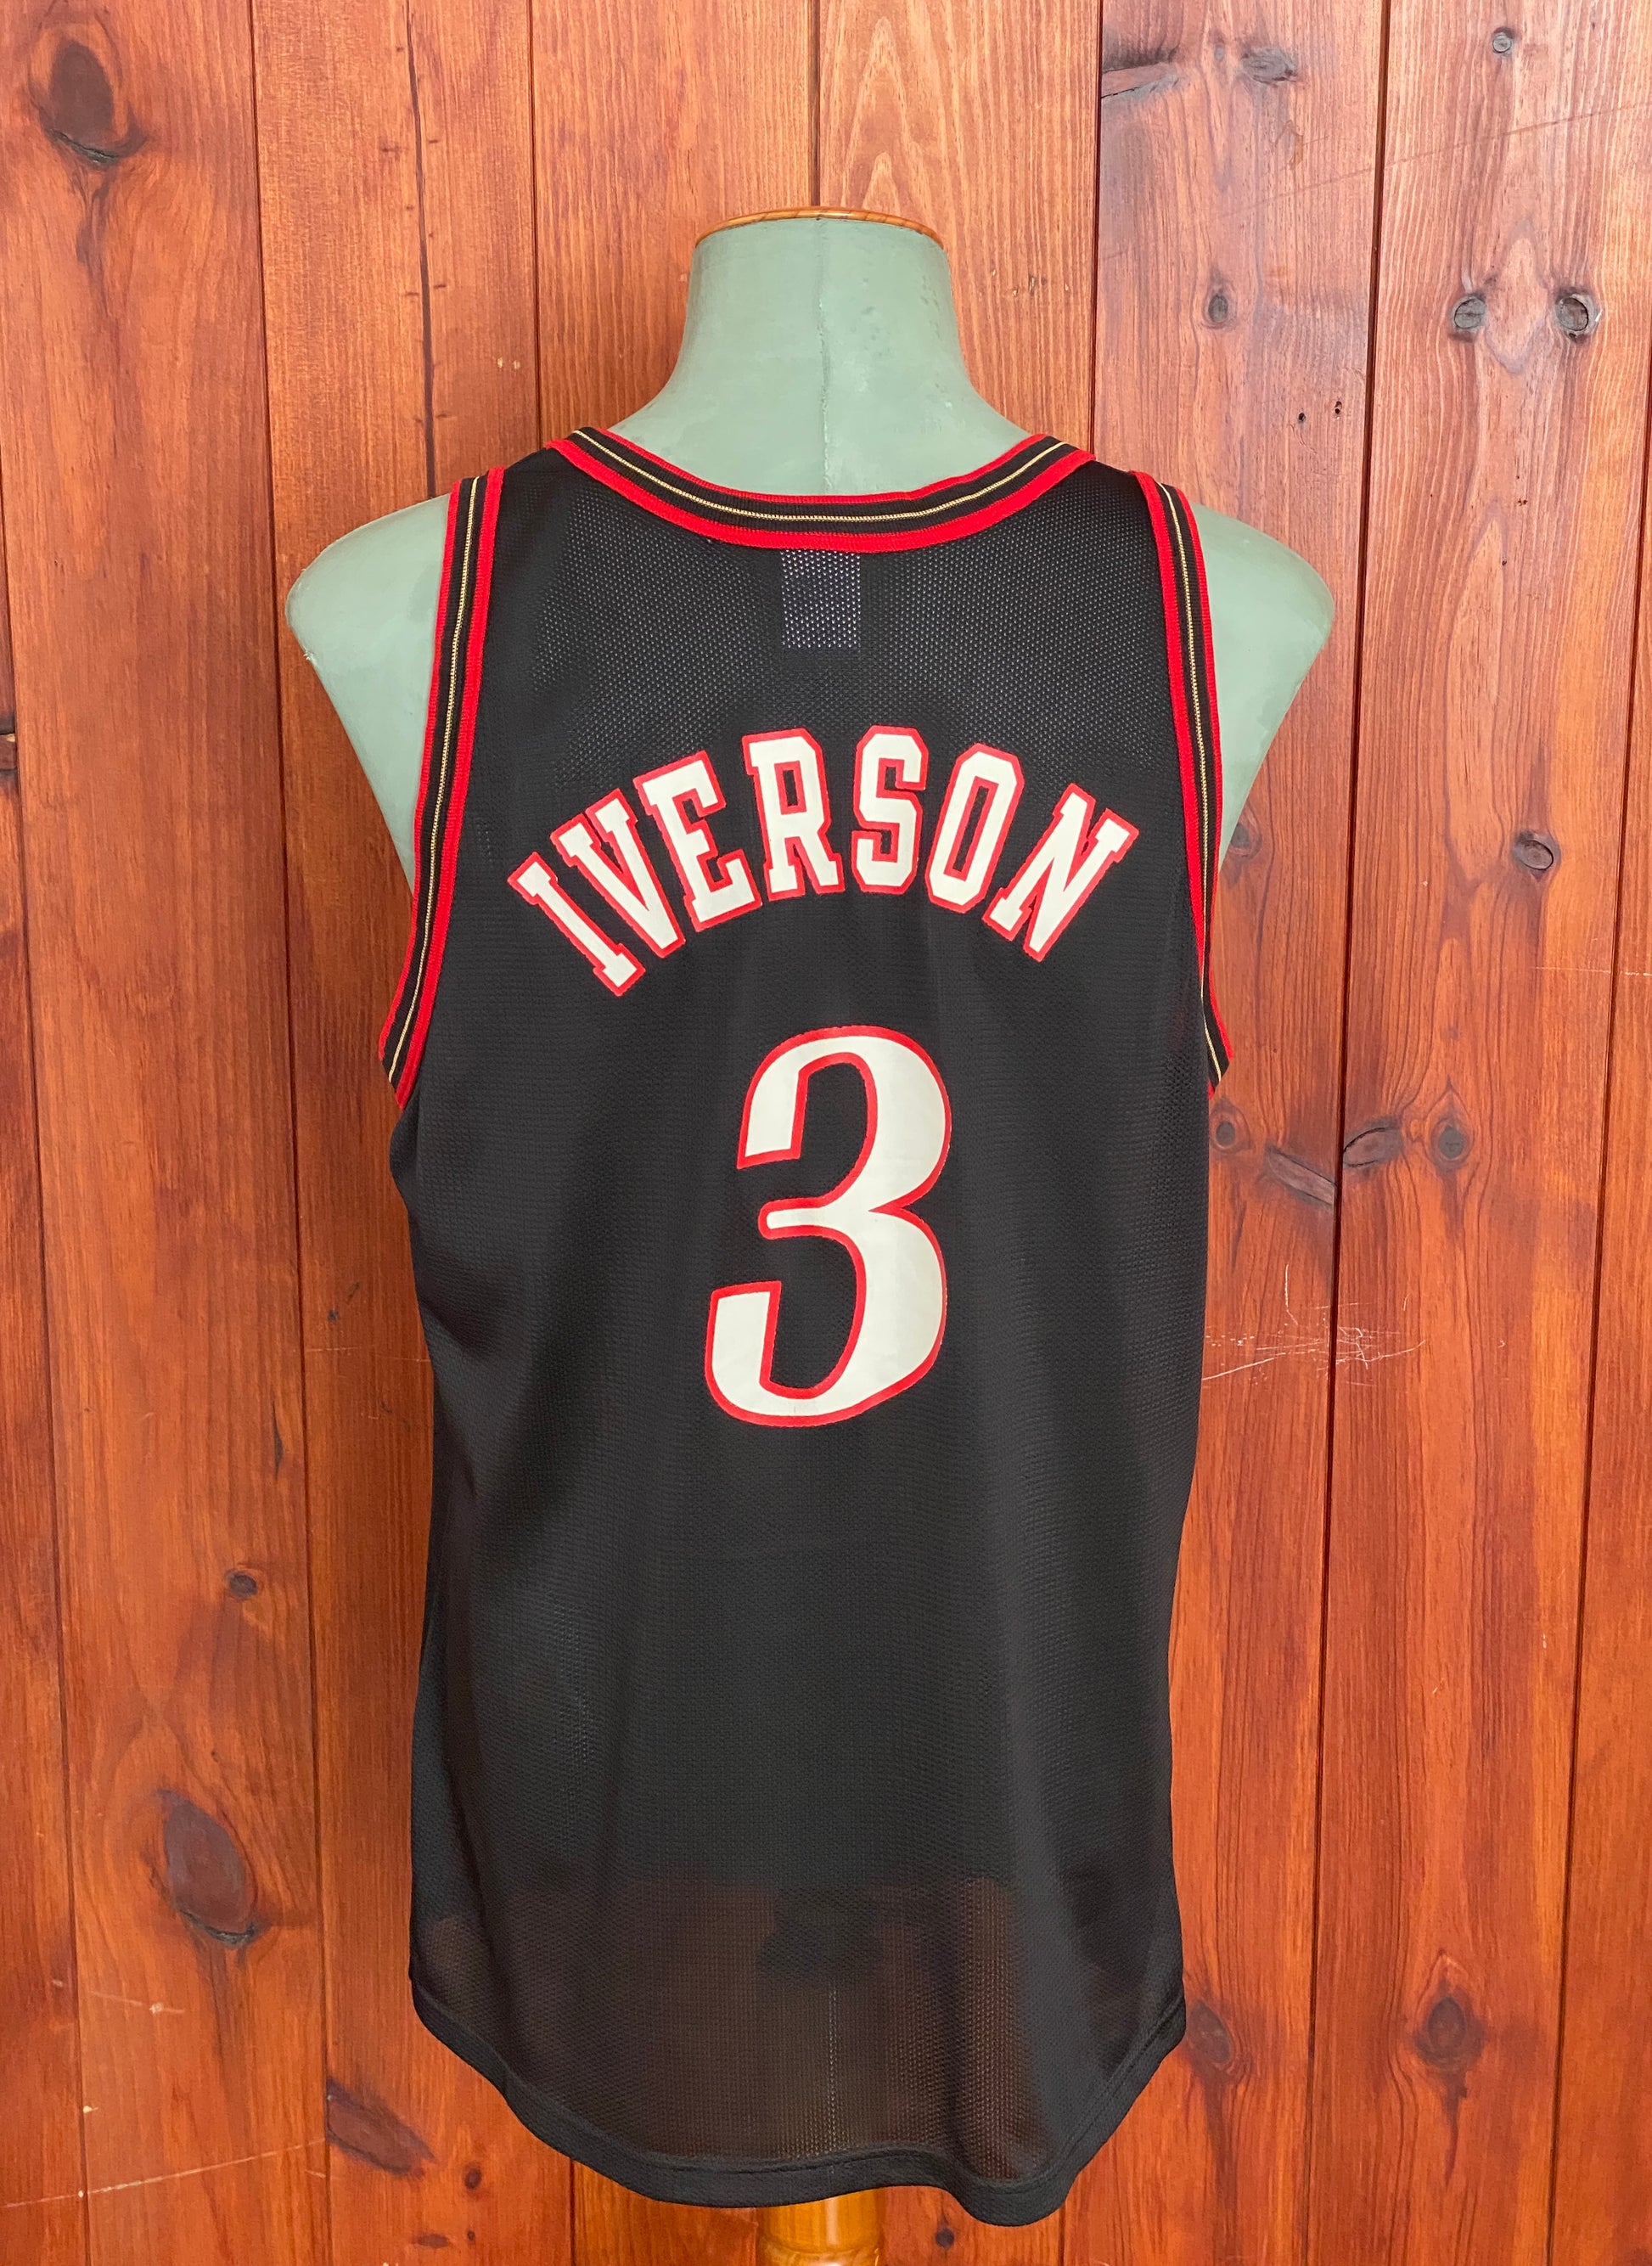 90s Vintage Sixters NBA Jersey - #3 Iverson - Made by Champion - Size 48